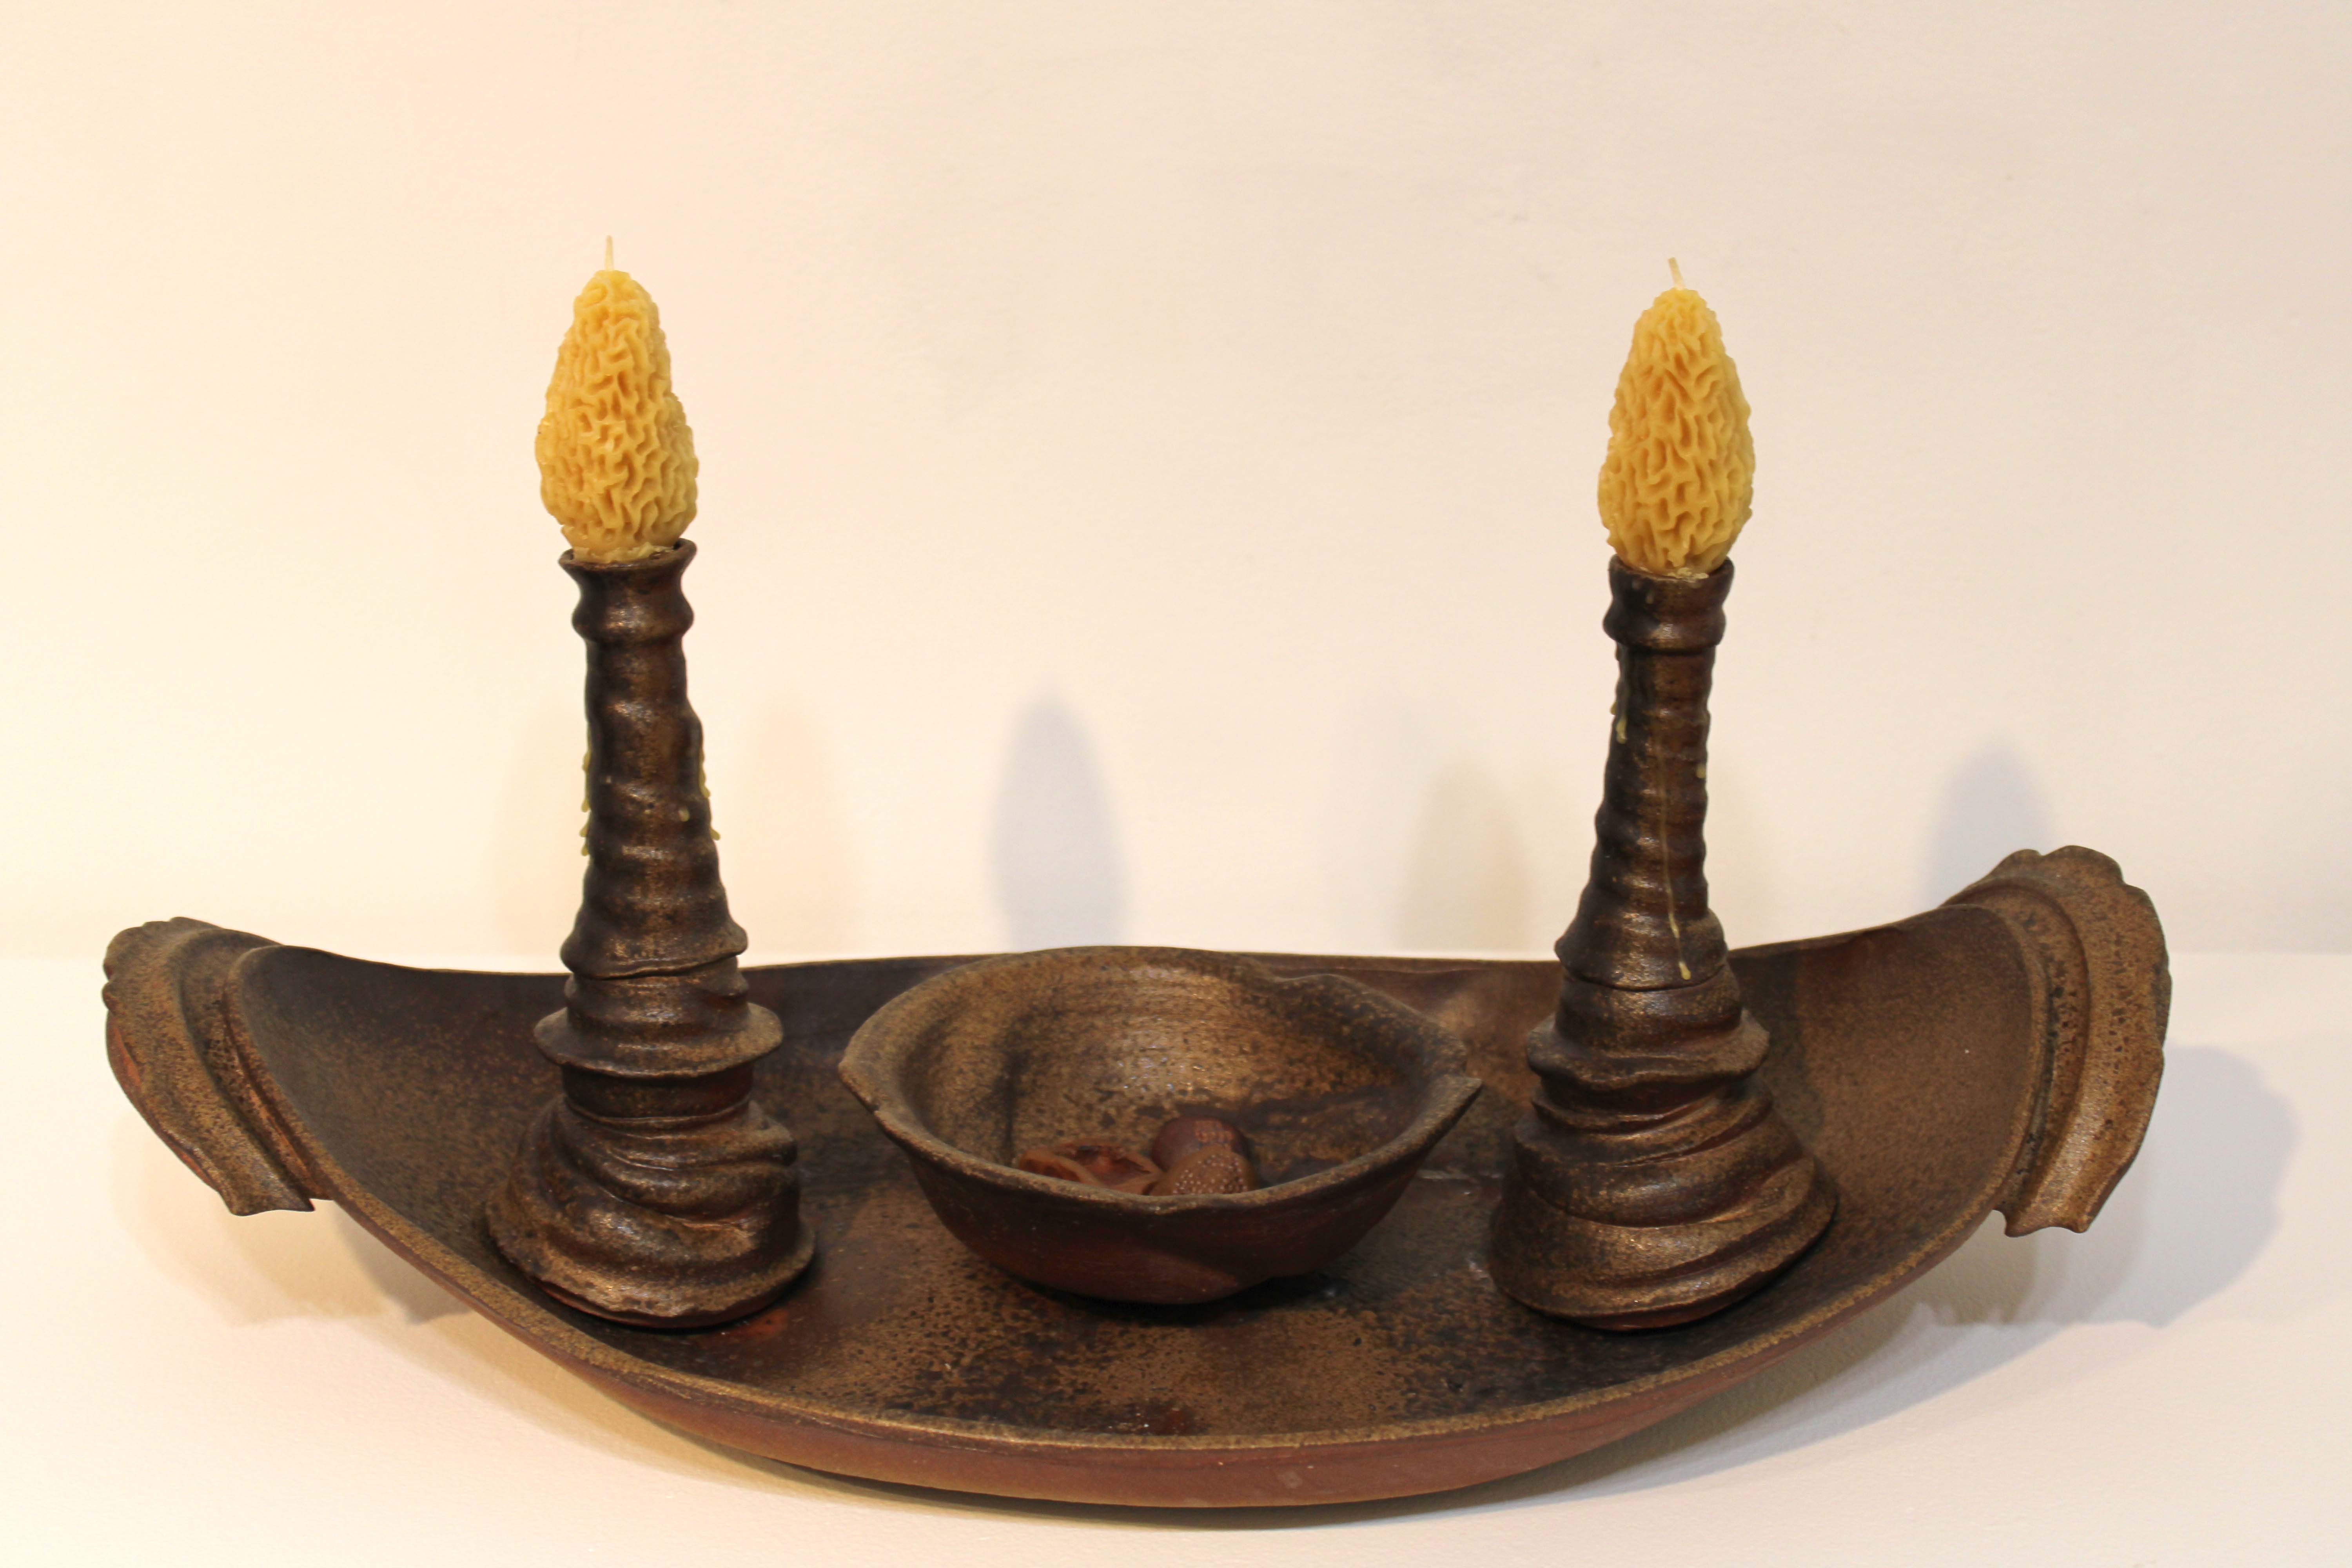 Curved platter with candlestick holders and bowl. Bowl contains small trinkets. Candlestick holders contain beeswax candles.